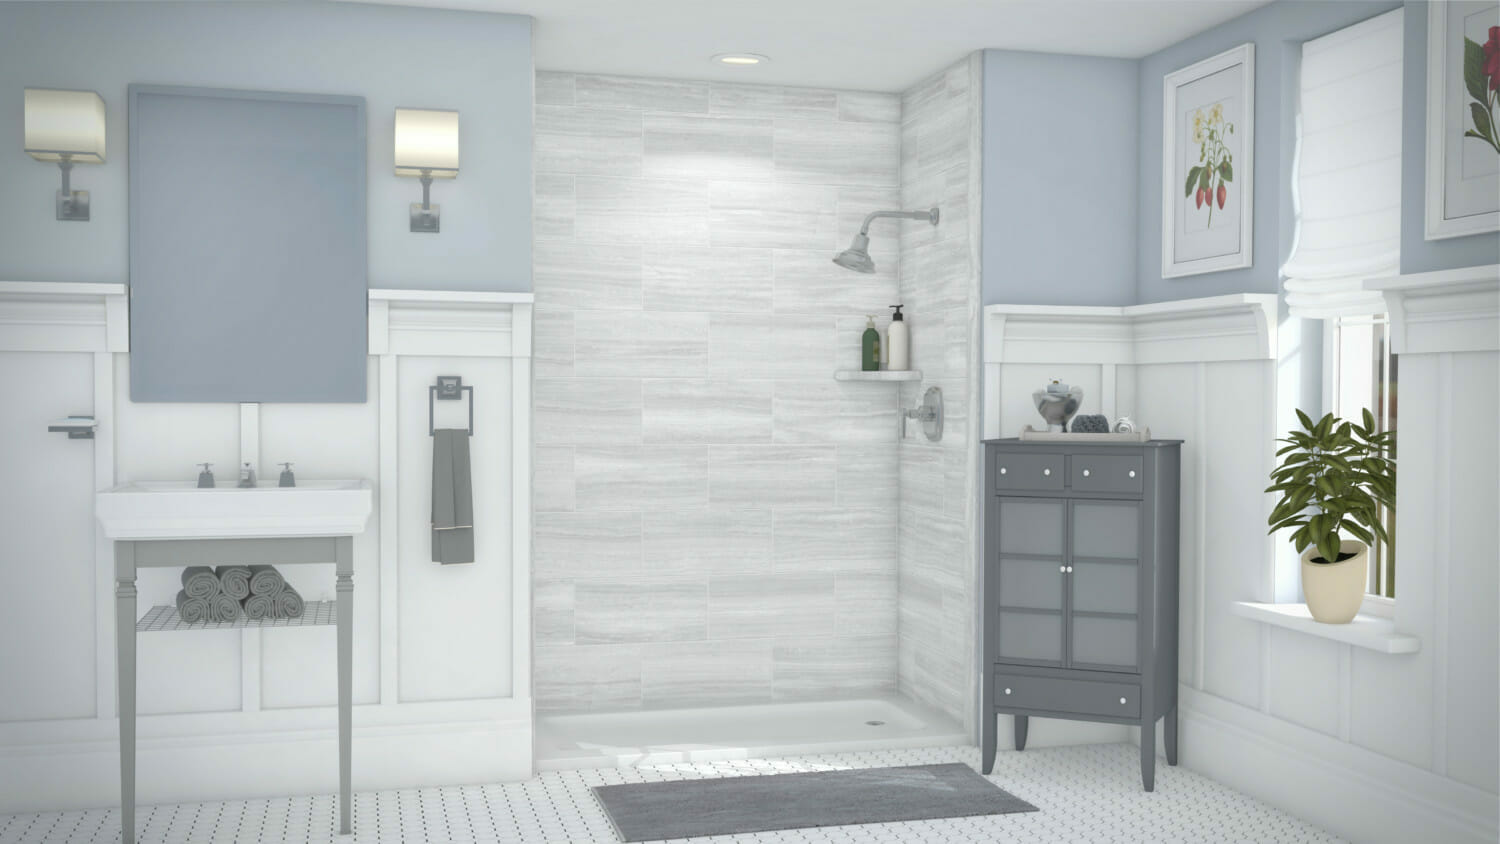 Safe and accessible Bathroom